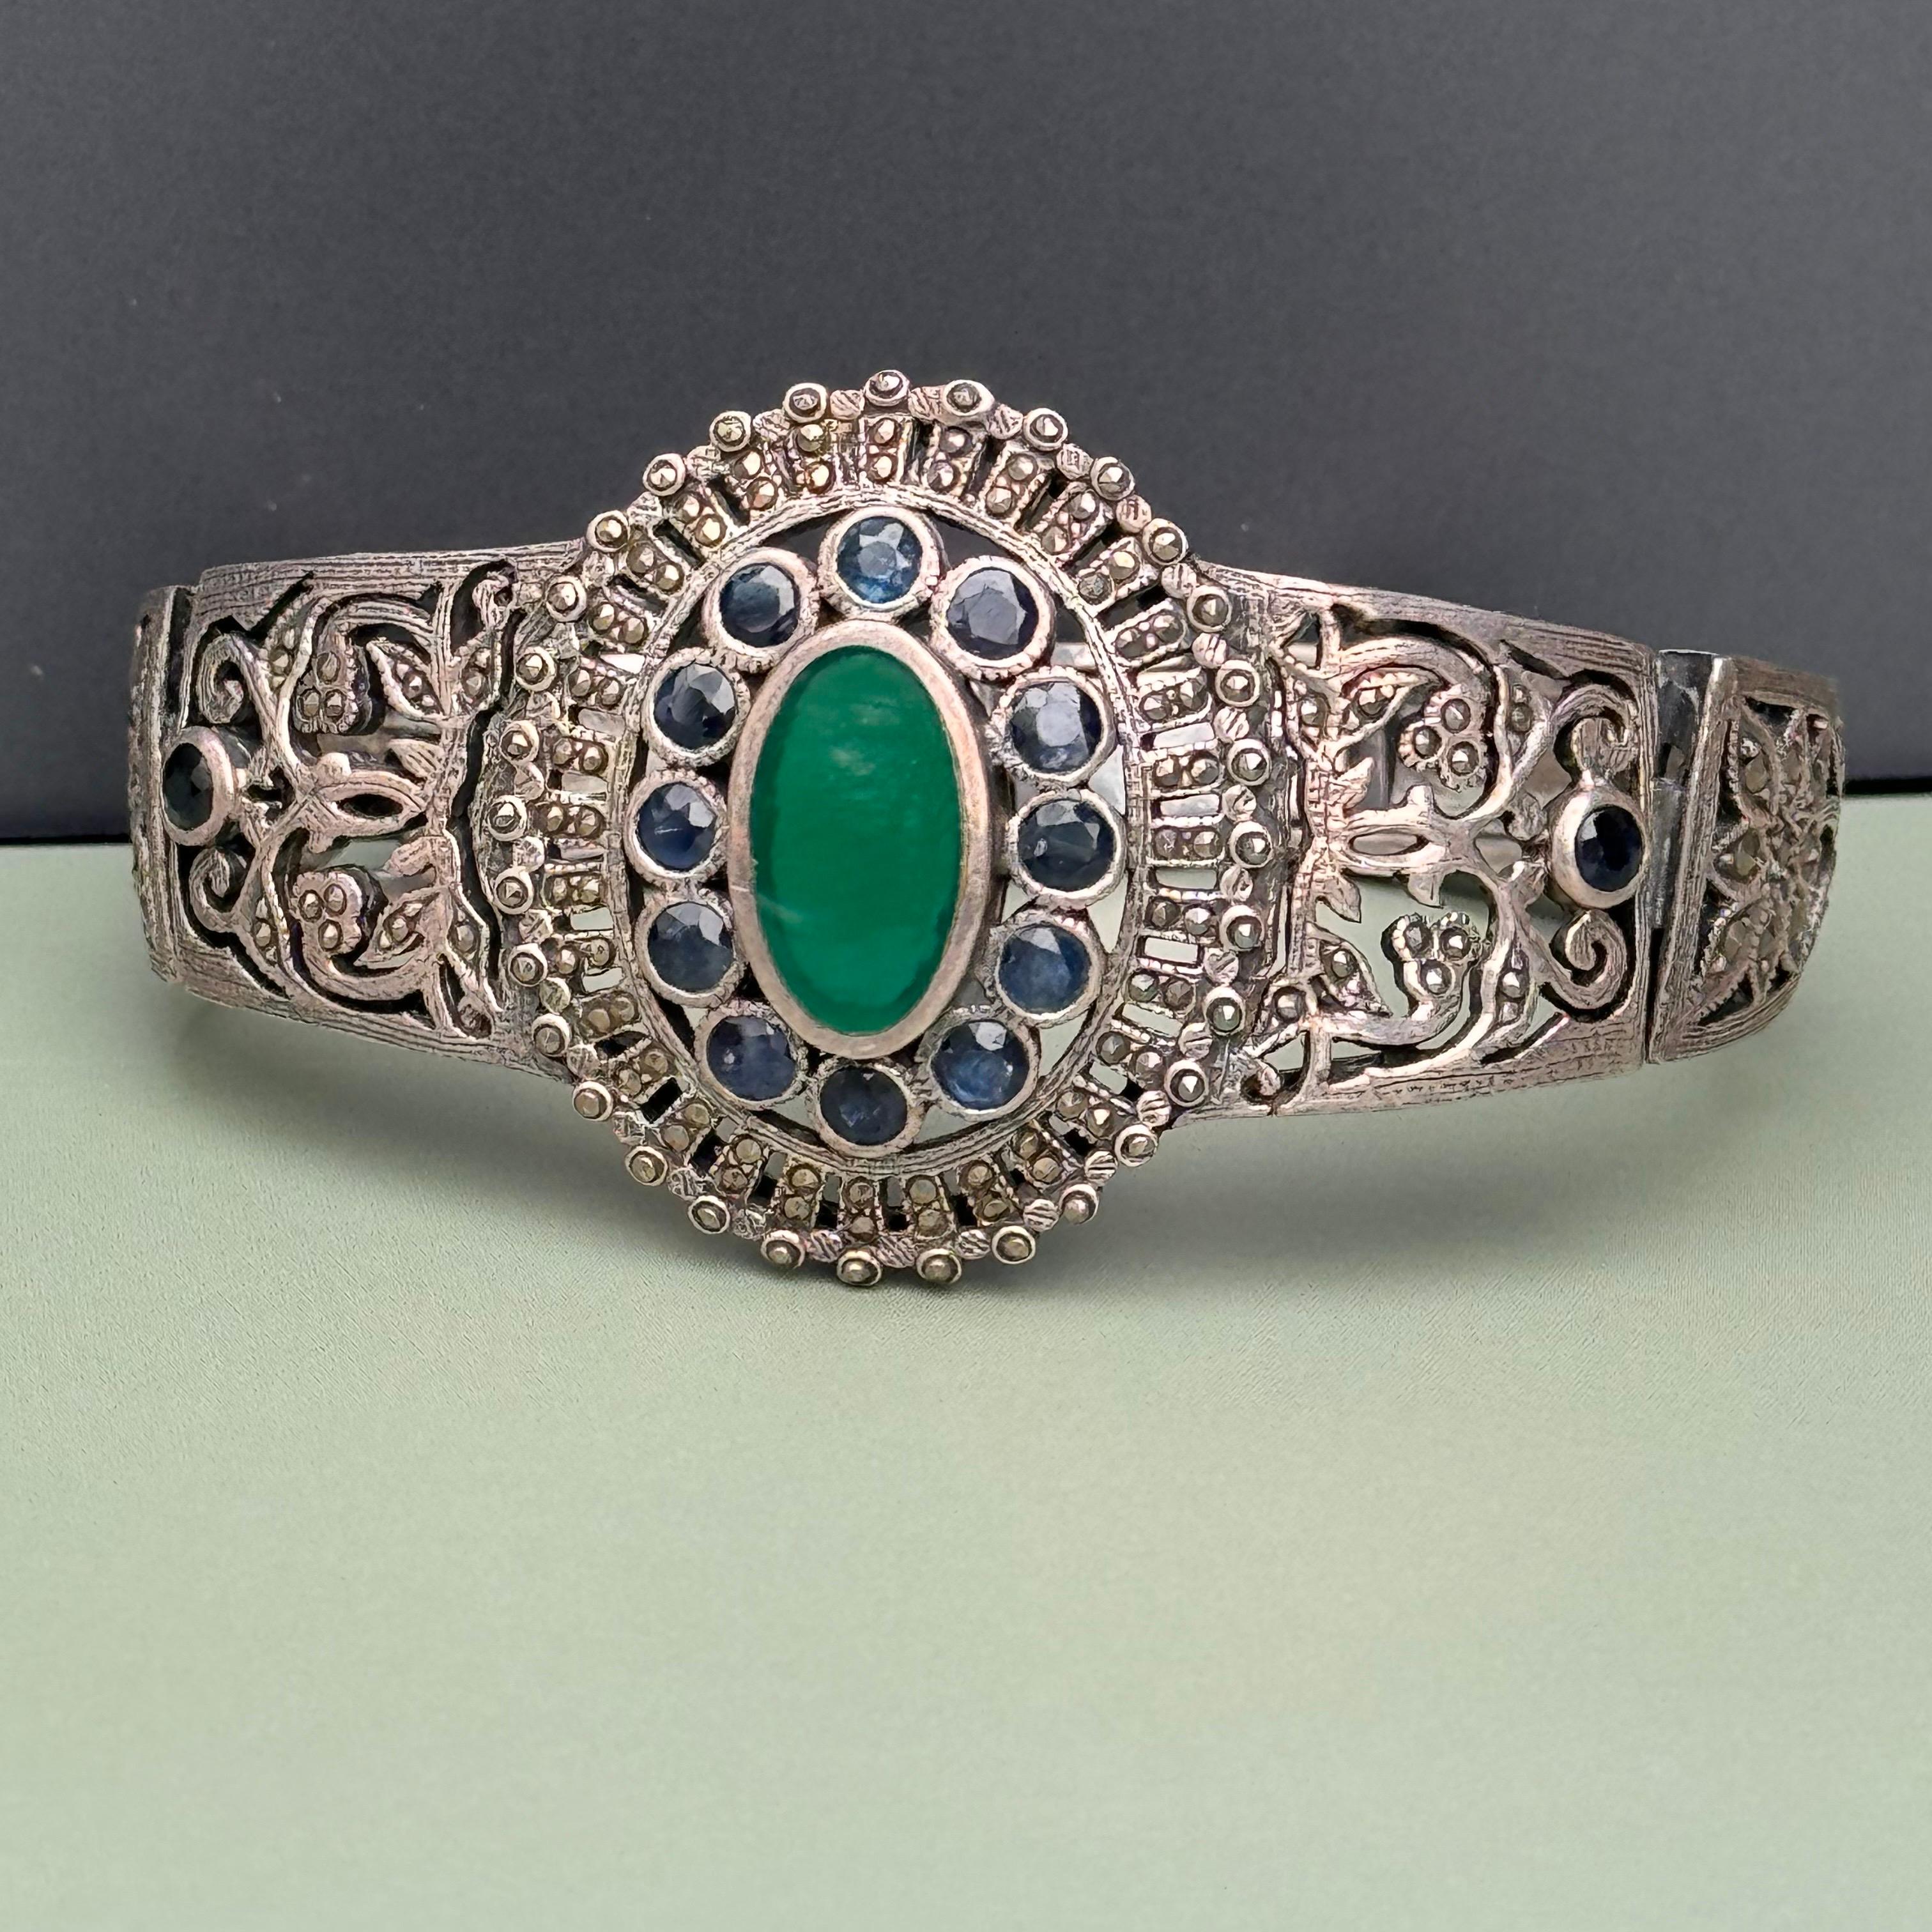 Vintage  Art Deco Sterling Silver Sapphire and Marcasite Bracelet  featuring a large central green onyx stone, radiating with rich color and elegance. Surrounding the onyx are 14 faceted genuine sapphire cabochons, each meticulously set to enhance